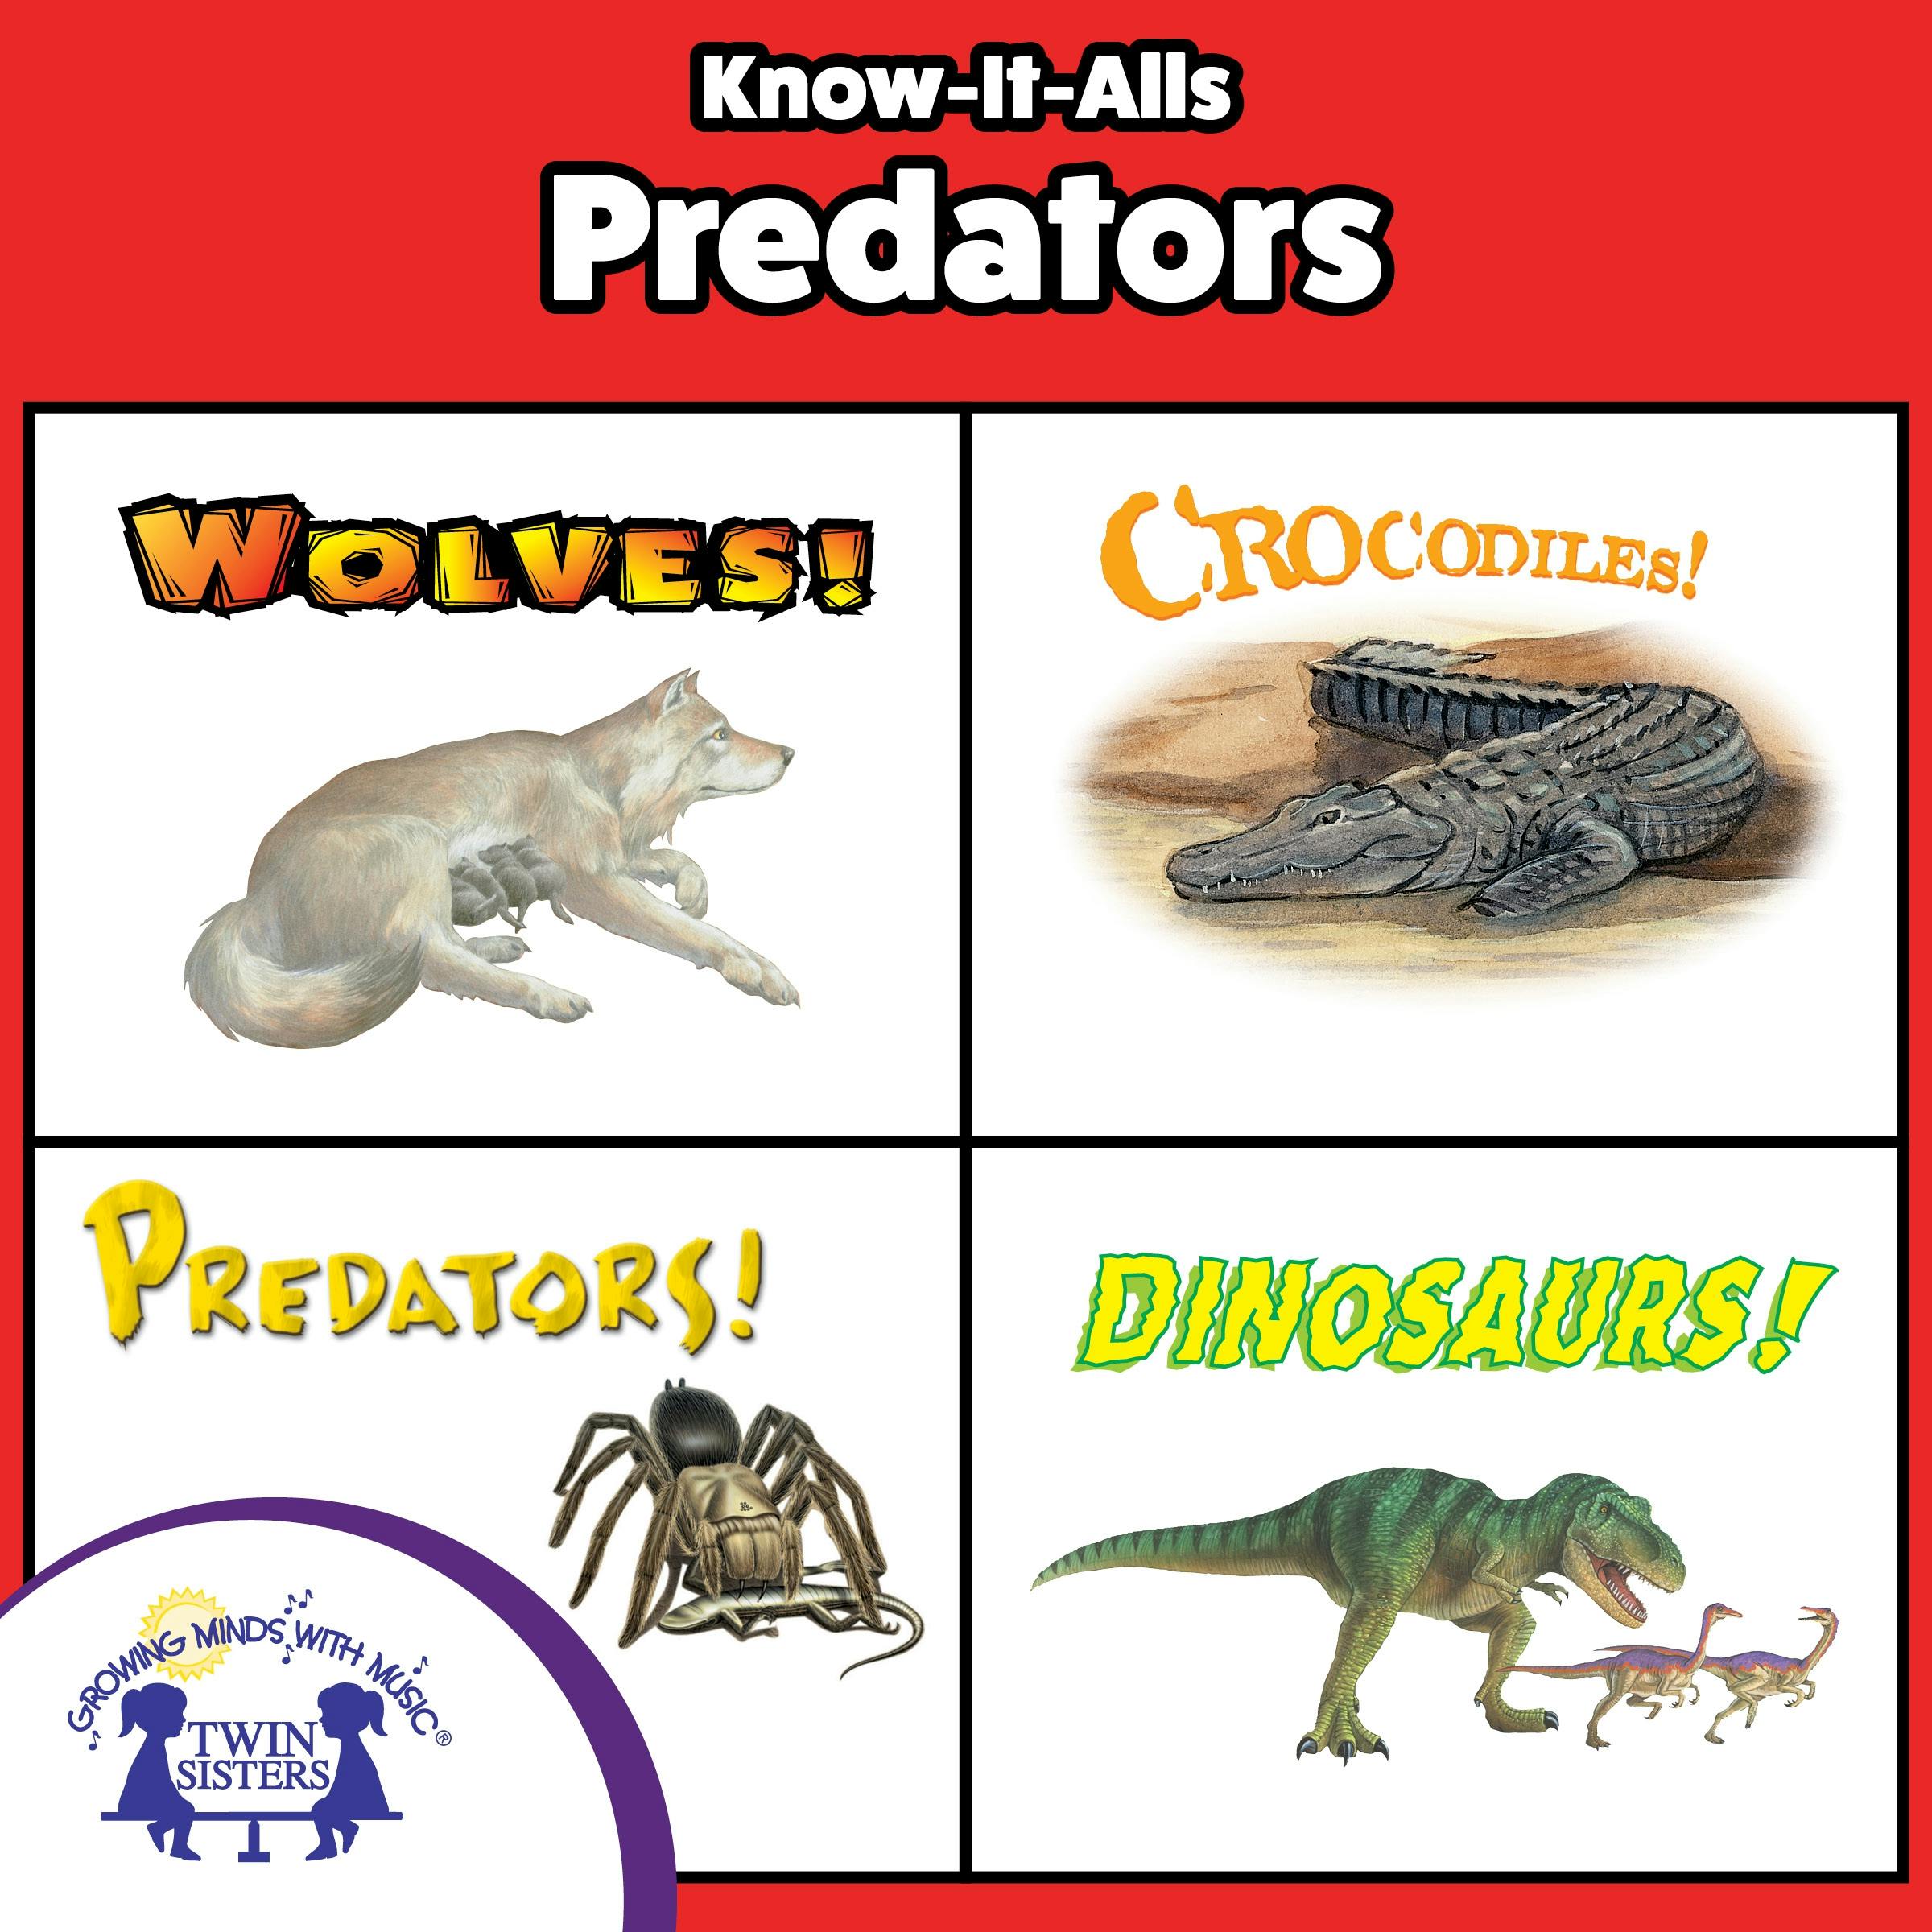 Know-It-Alls! Predators: Growing Minds with Music - undefined